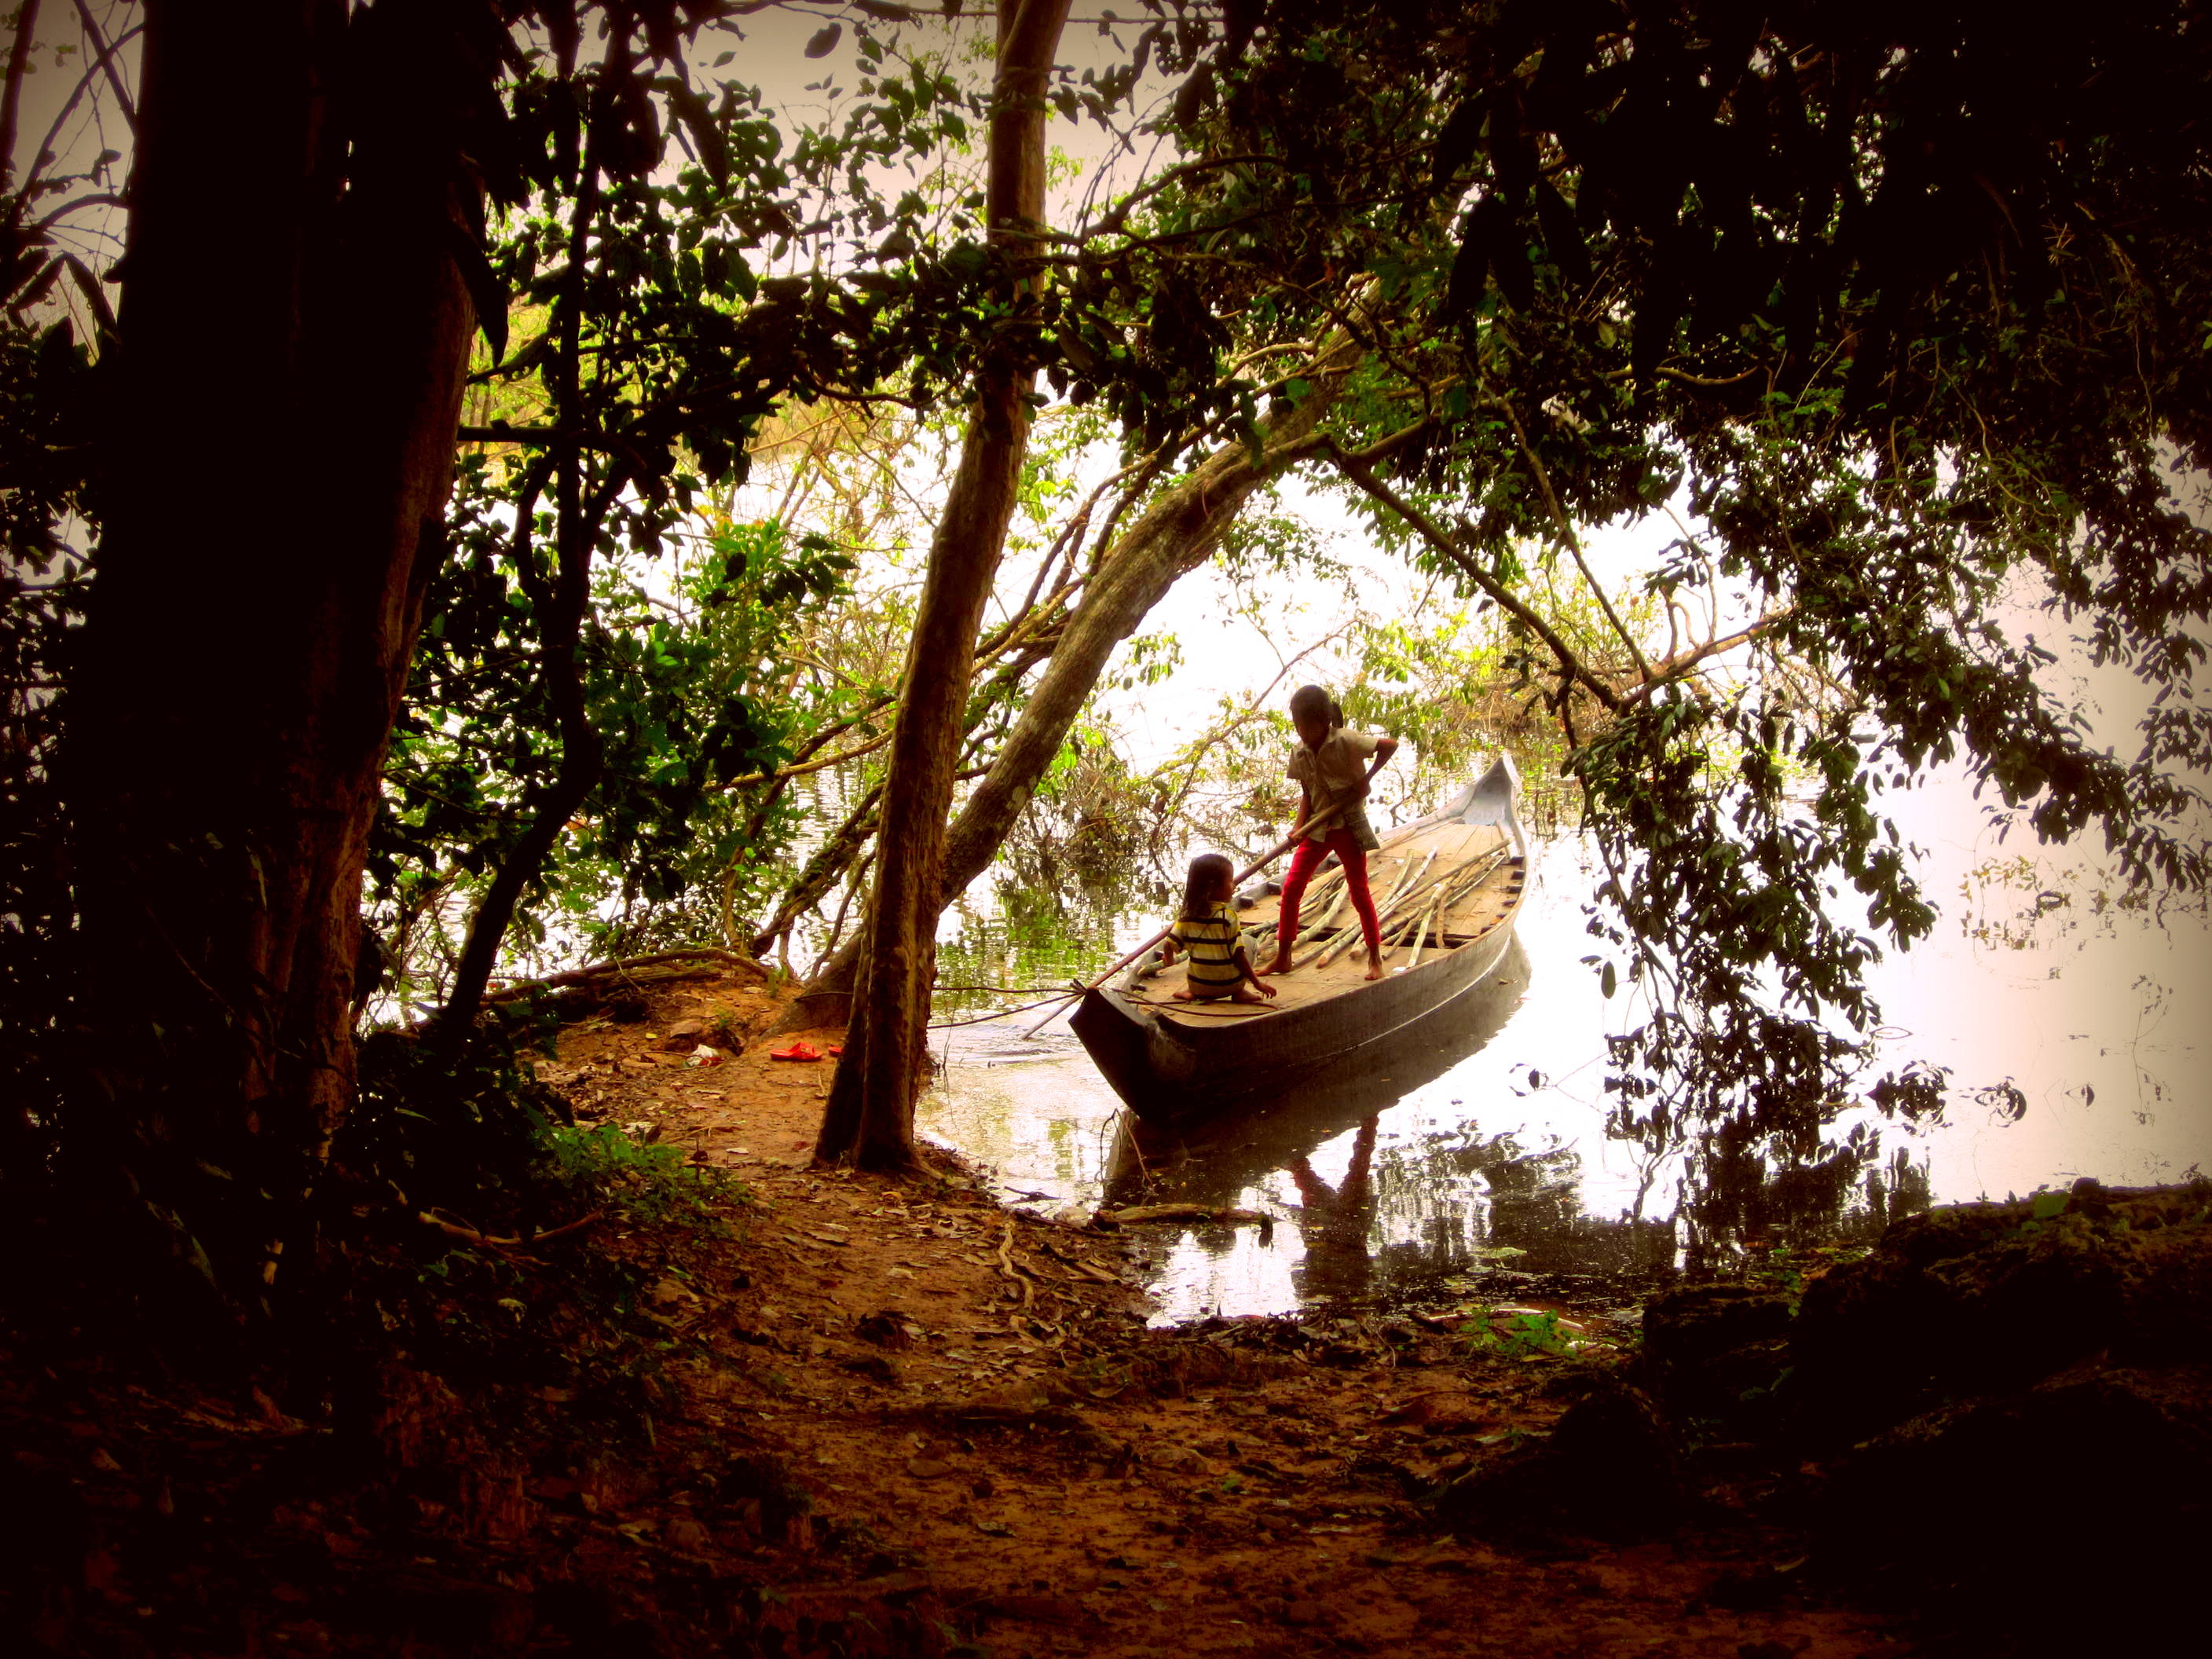 Cambodian girls in their boat